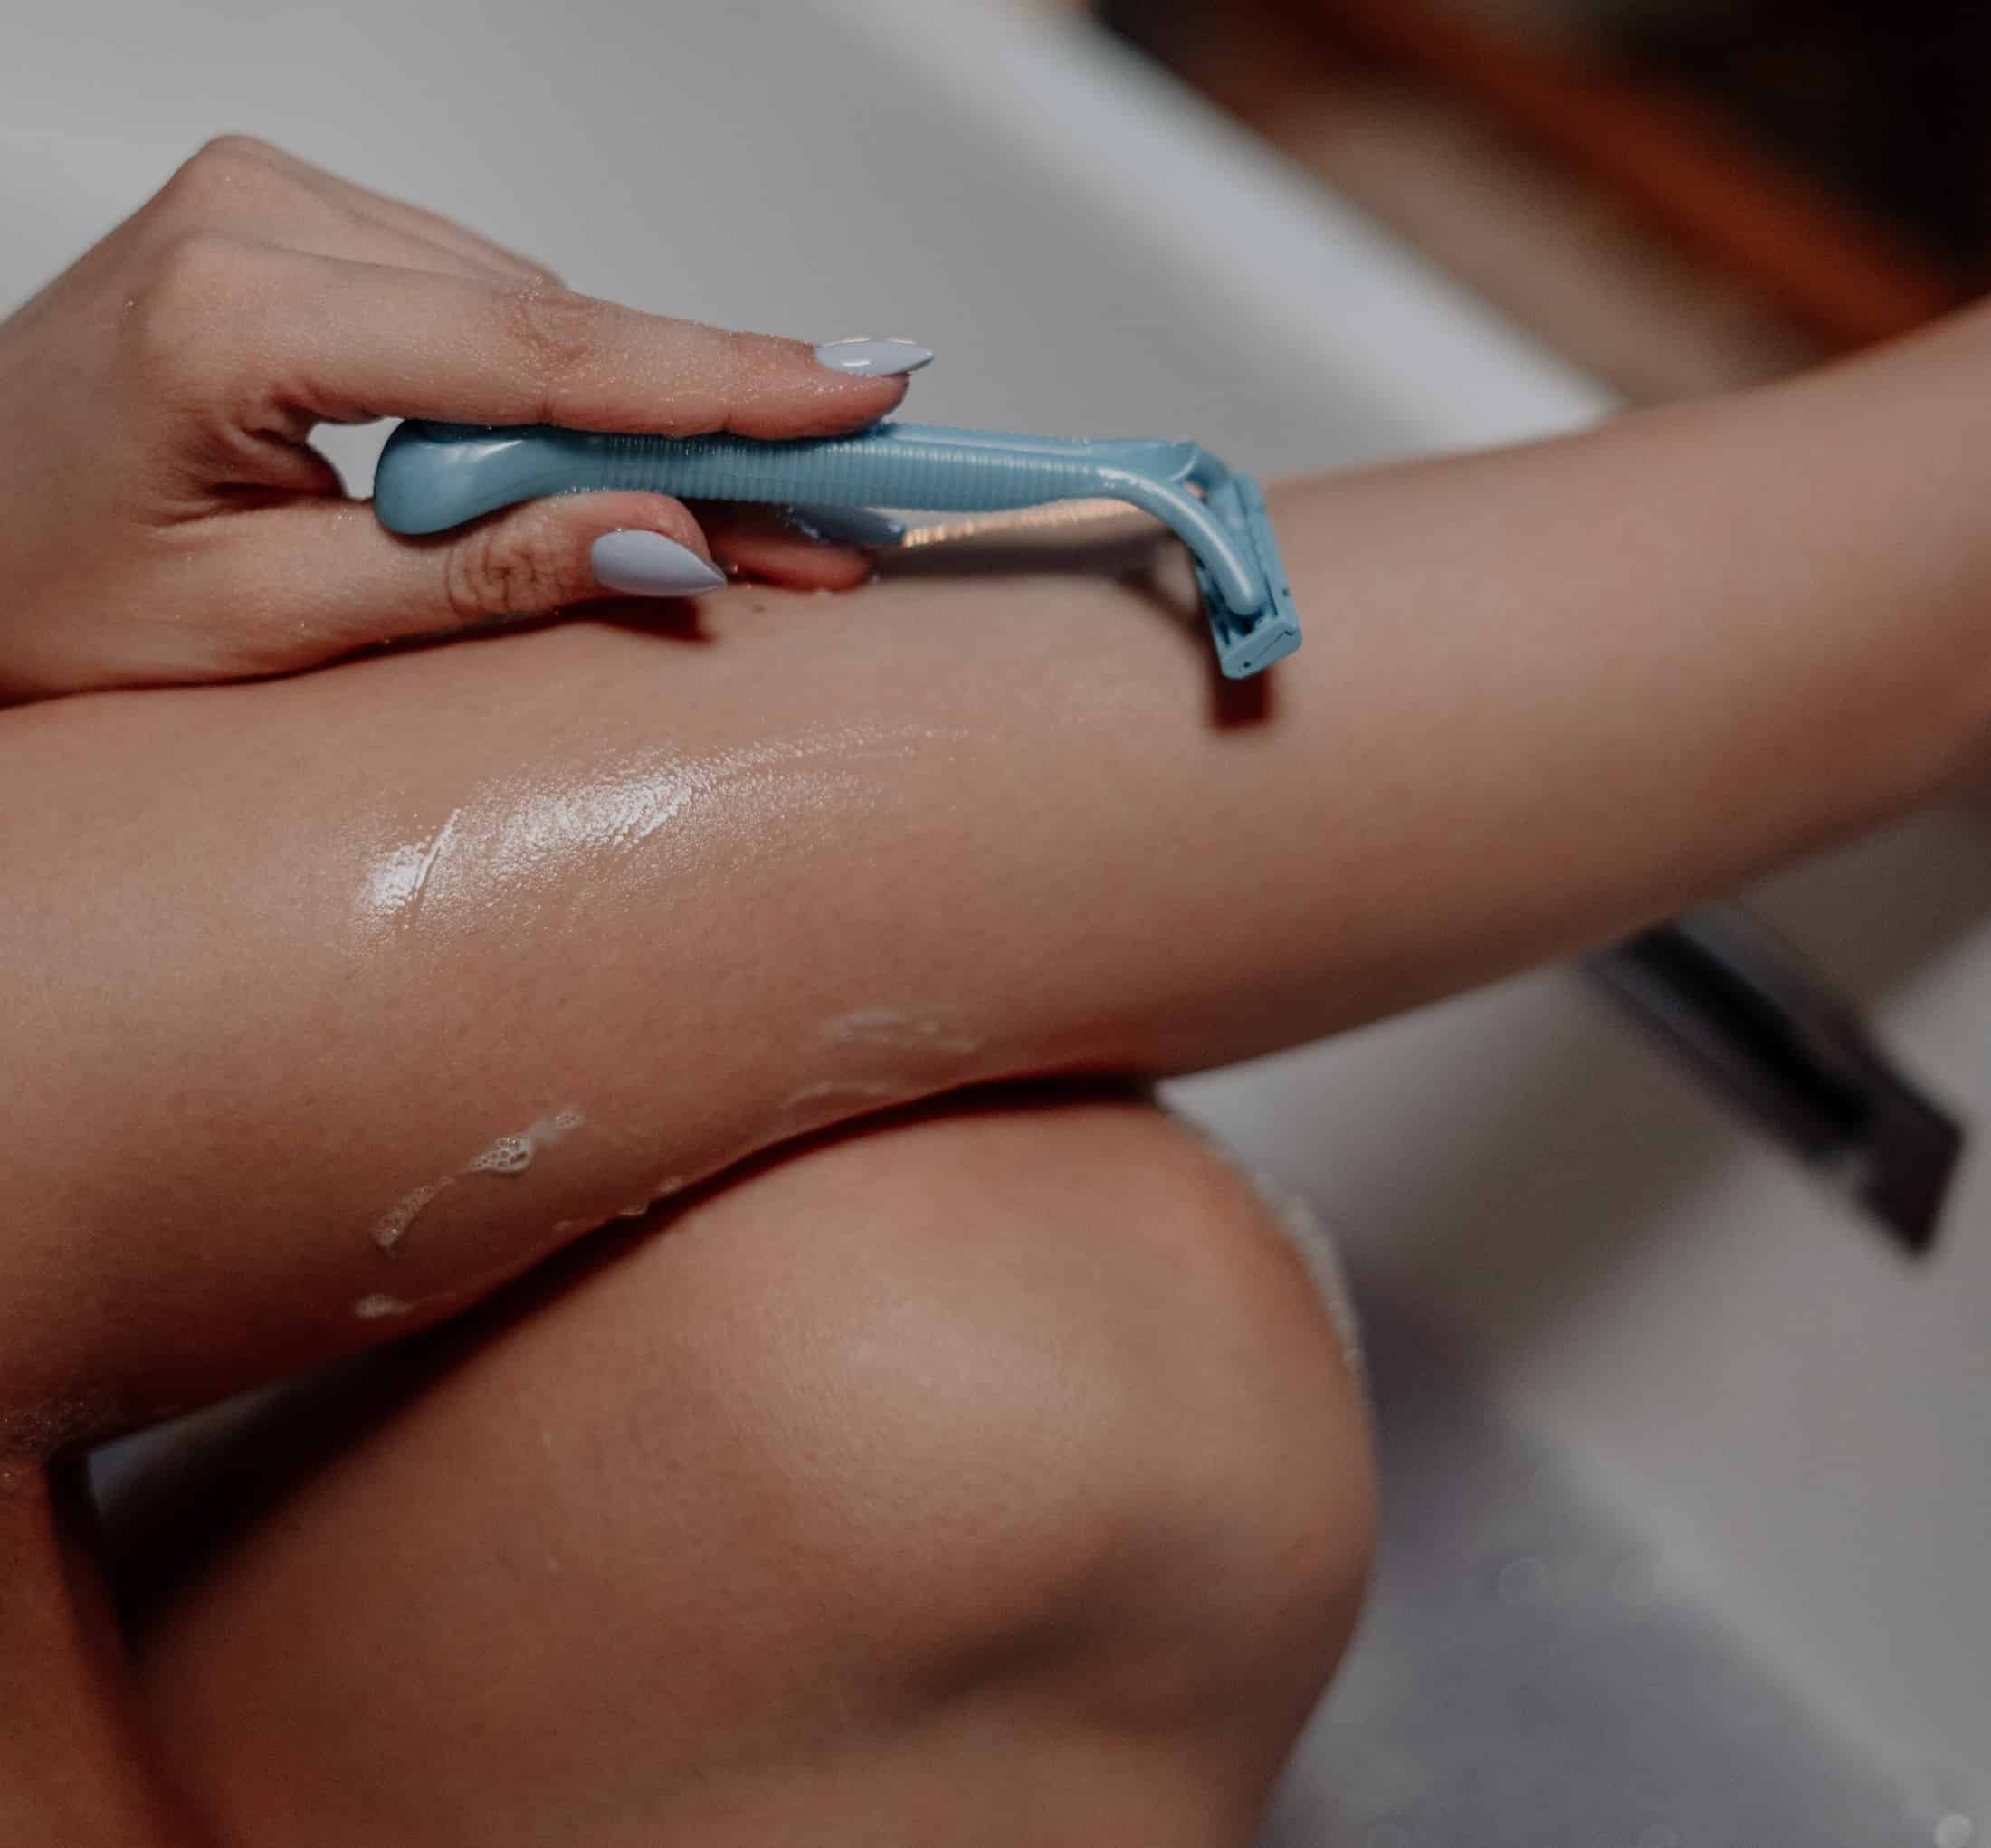 5 razor hair removal tips you probably didn’t know about